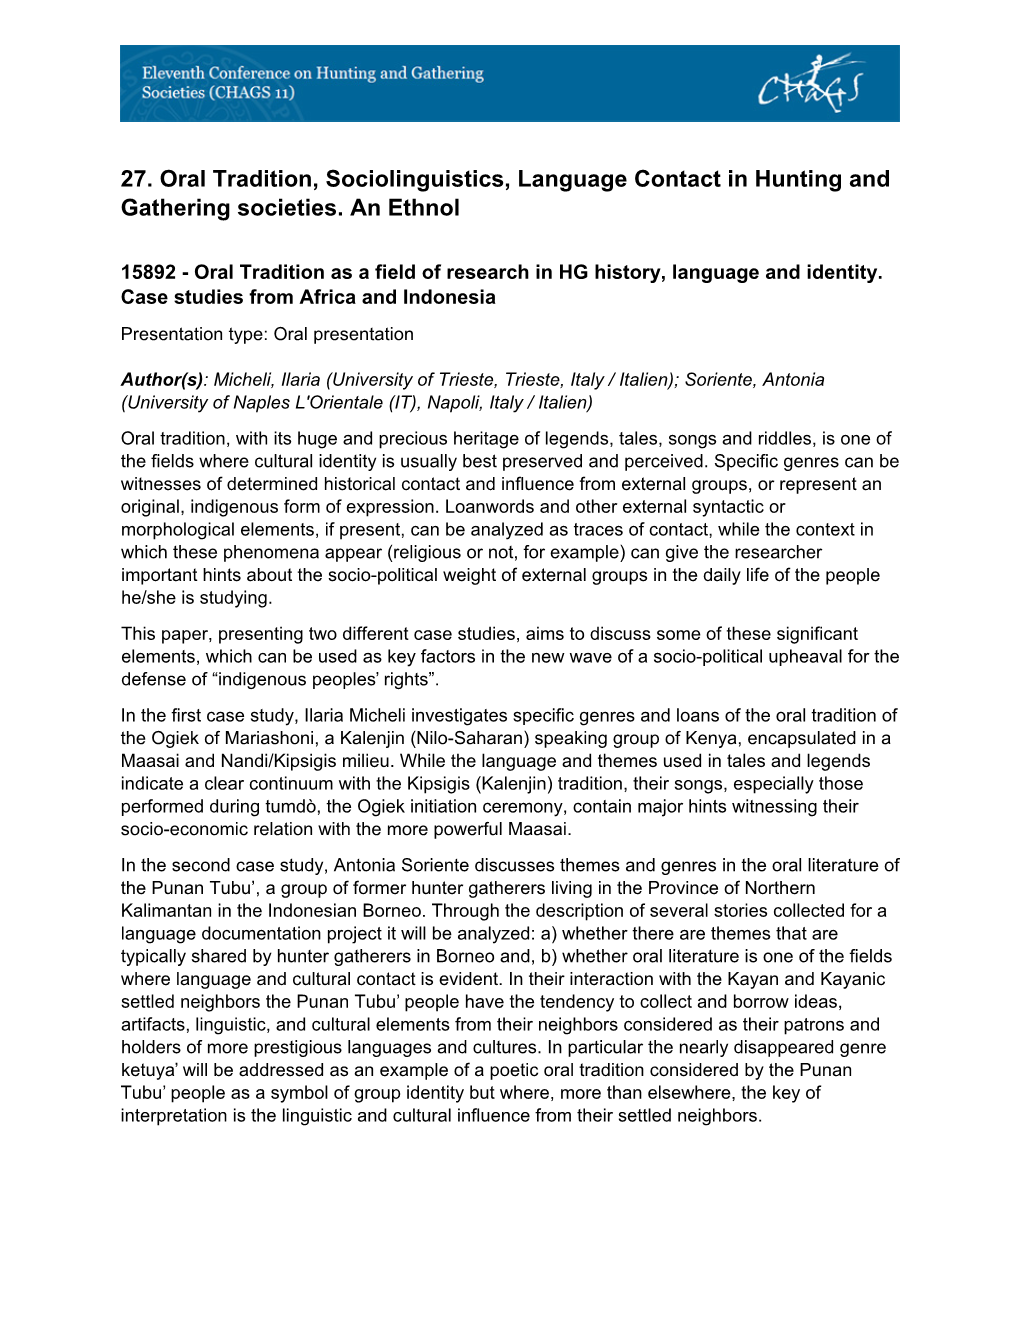 27. Oral Tradition, Sociolinguistics, Language Contact in Hunting and Gathering Societies